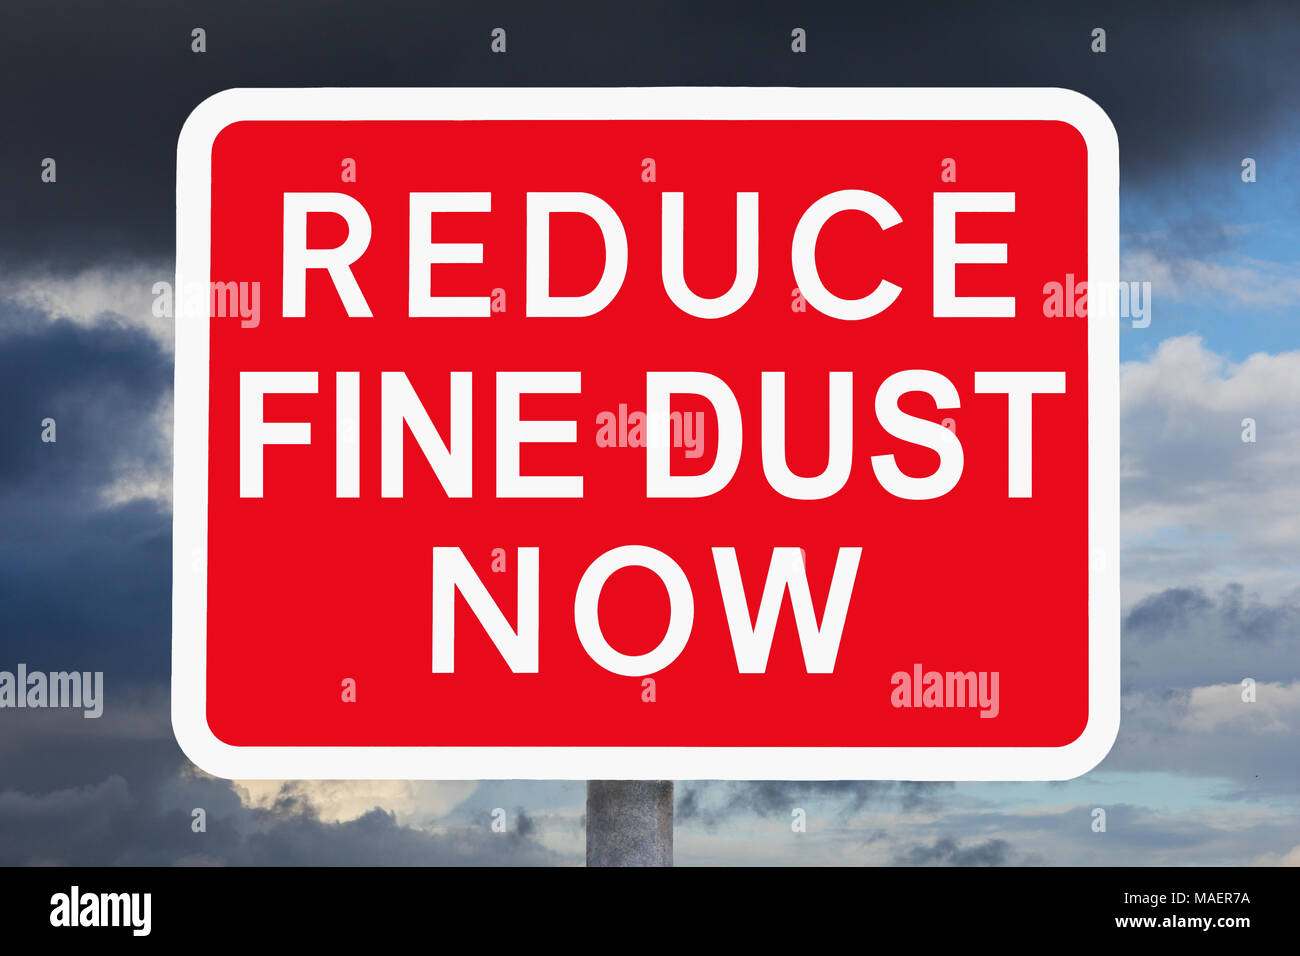 Red and white warning sign REDUCE FINE DUST NOW in front of a sky with very dark clouds, variation of a british traffic sign. Stock Photo